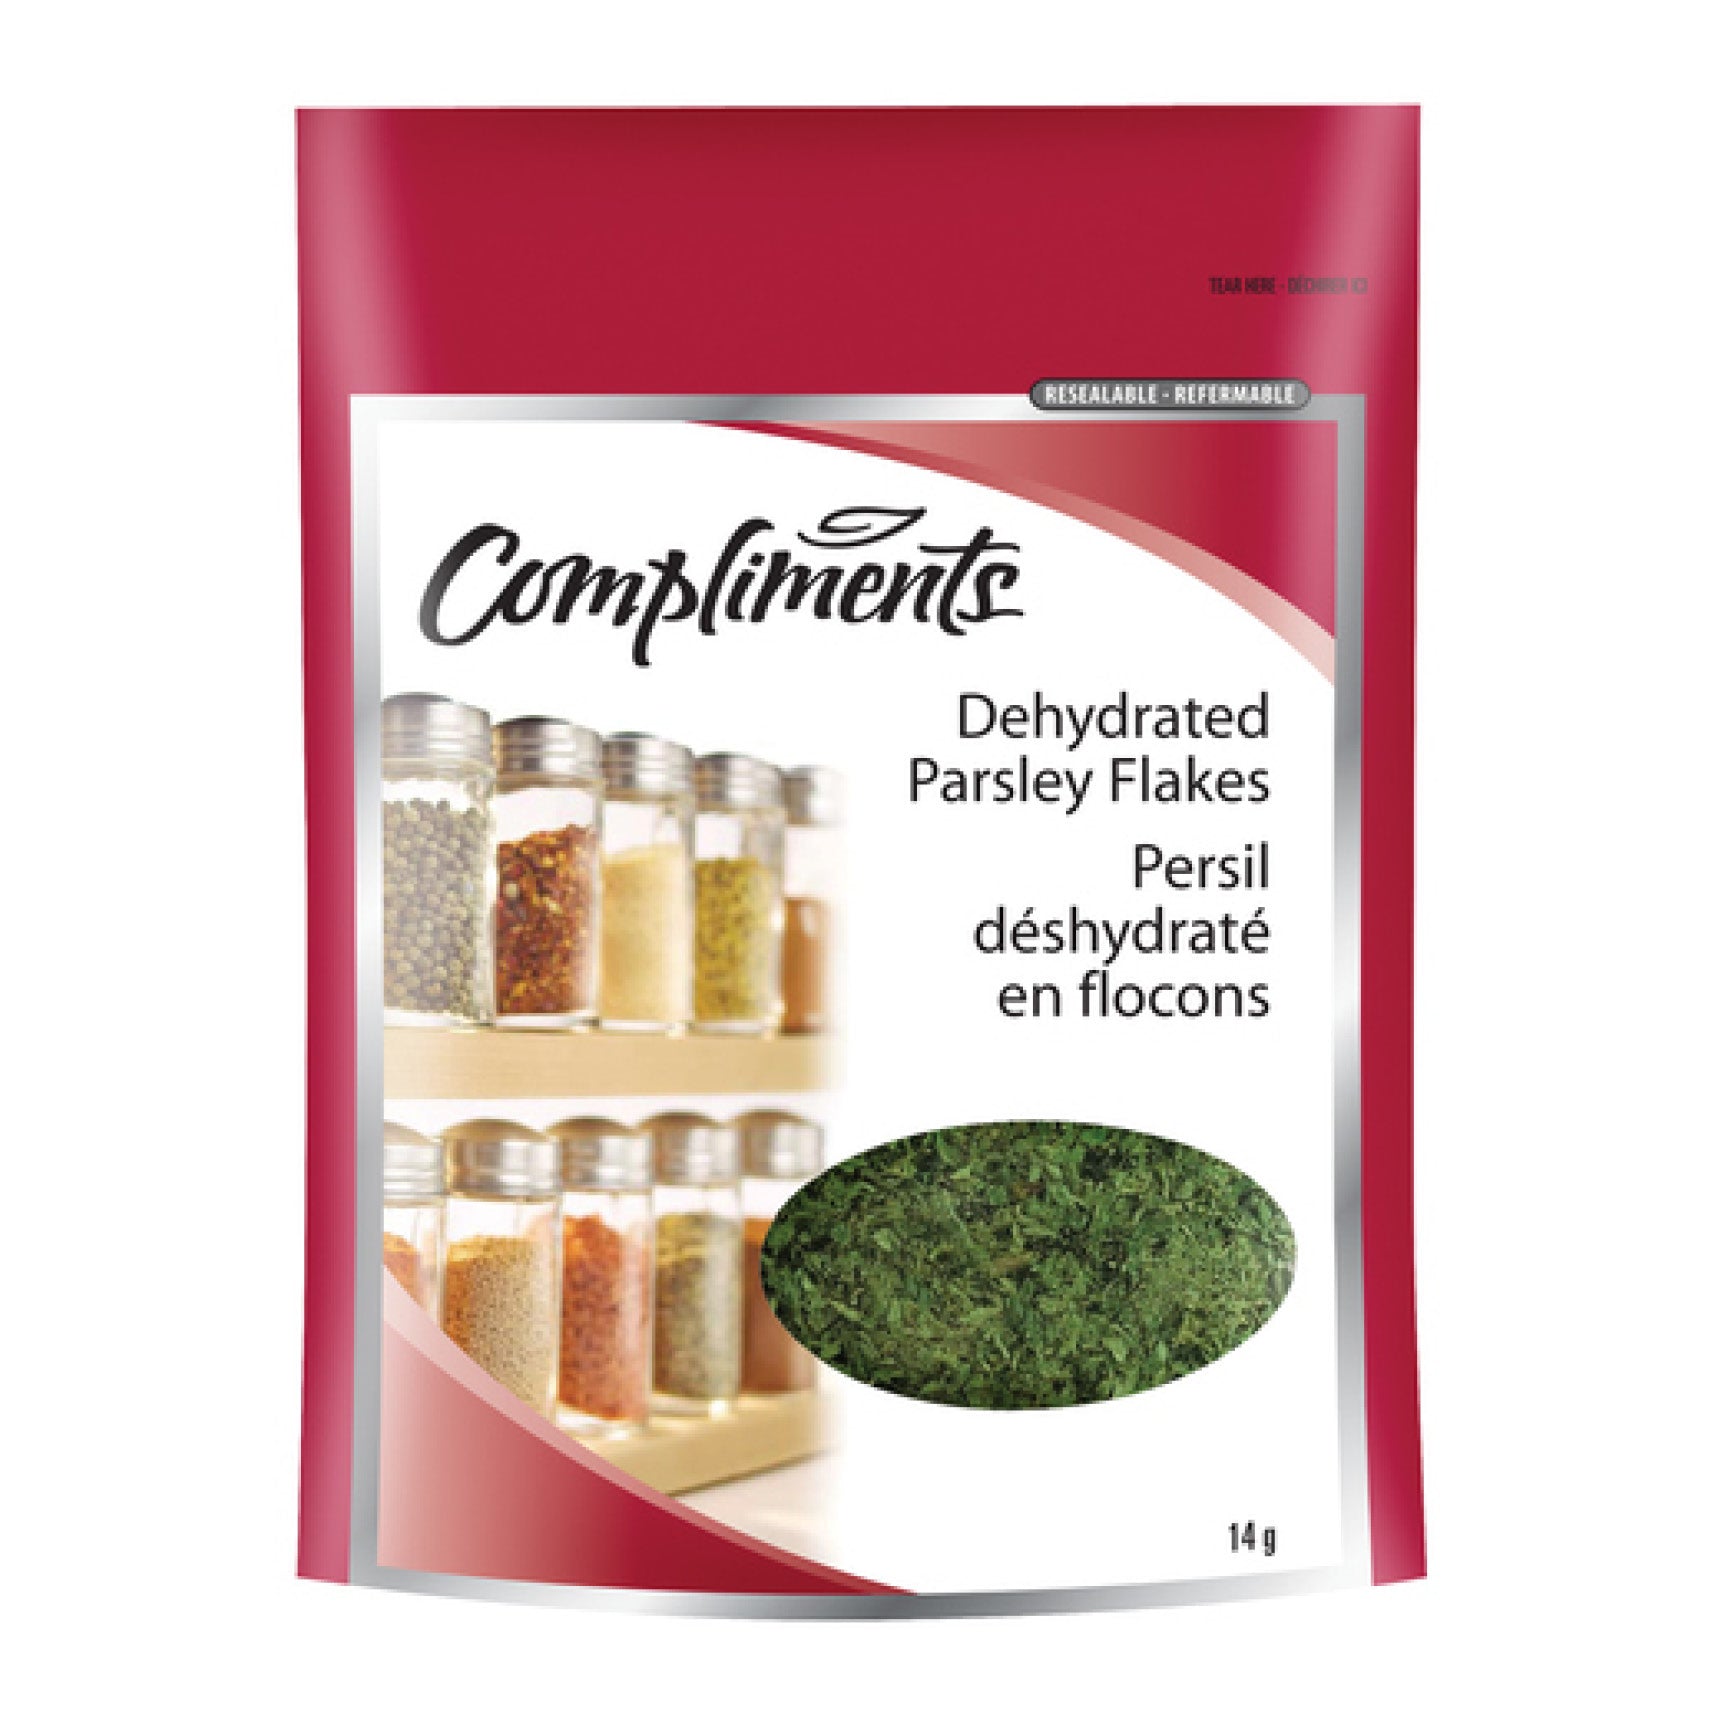 Compliments Parsley Flakes Dehydrated, 14g